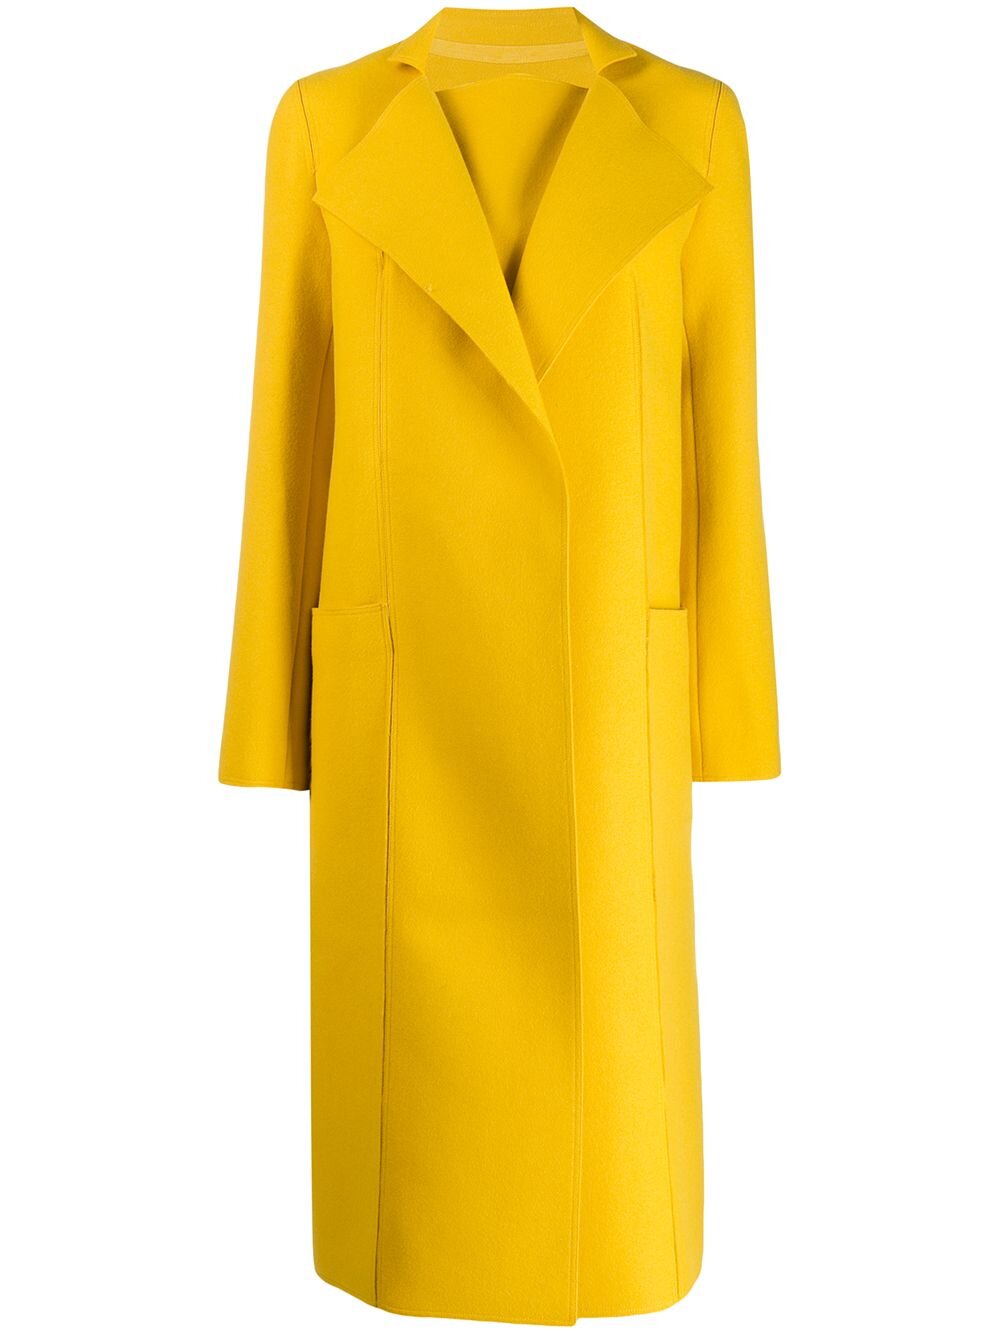 Maison Rabih Kayrouz Concealed Front Fastening Coat in Yellow — UFO No More